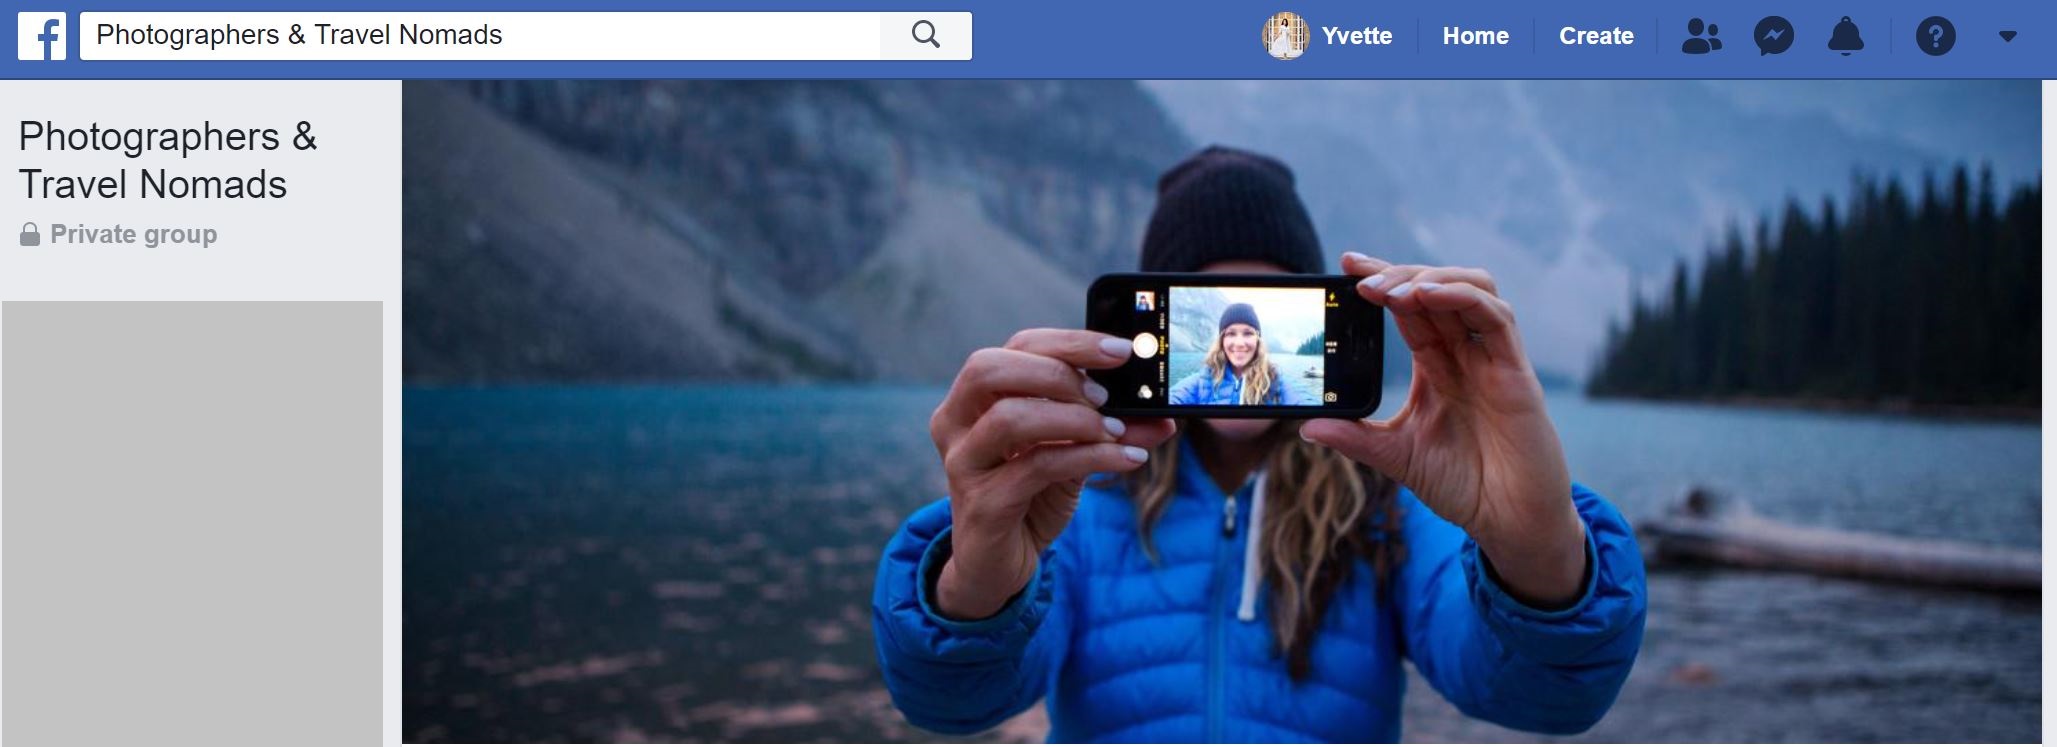 15 Must Join Facebook Groups for Travelers